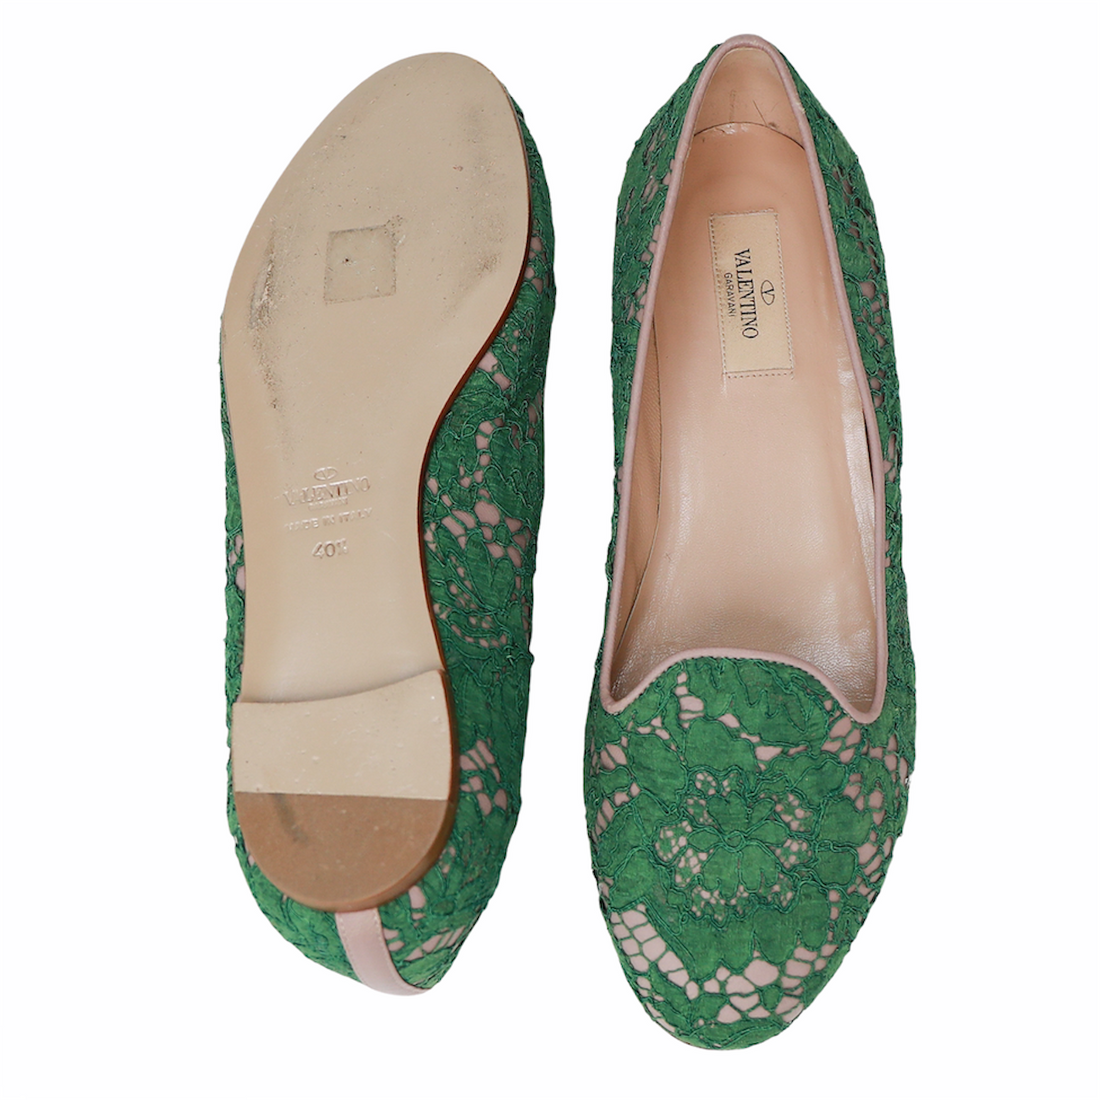 Valentino loafers in green lace